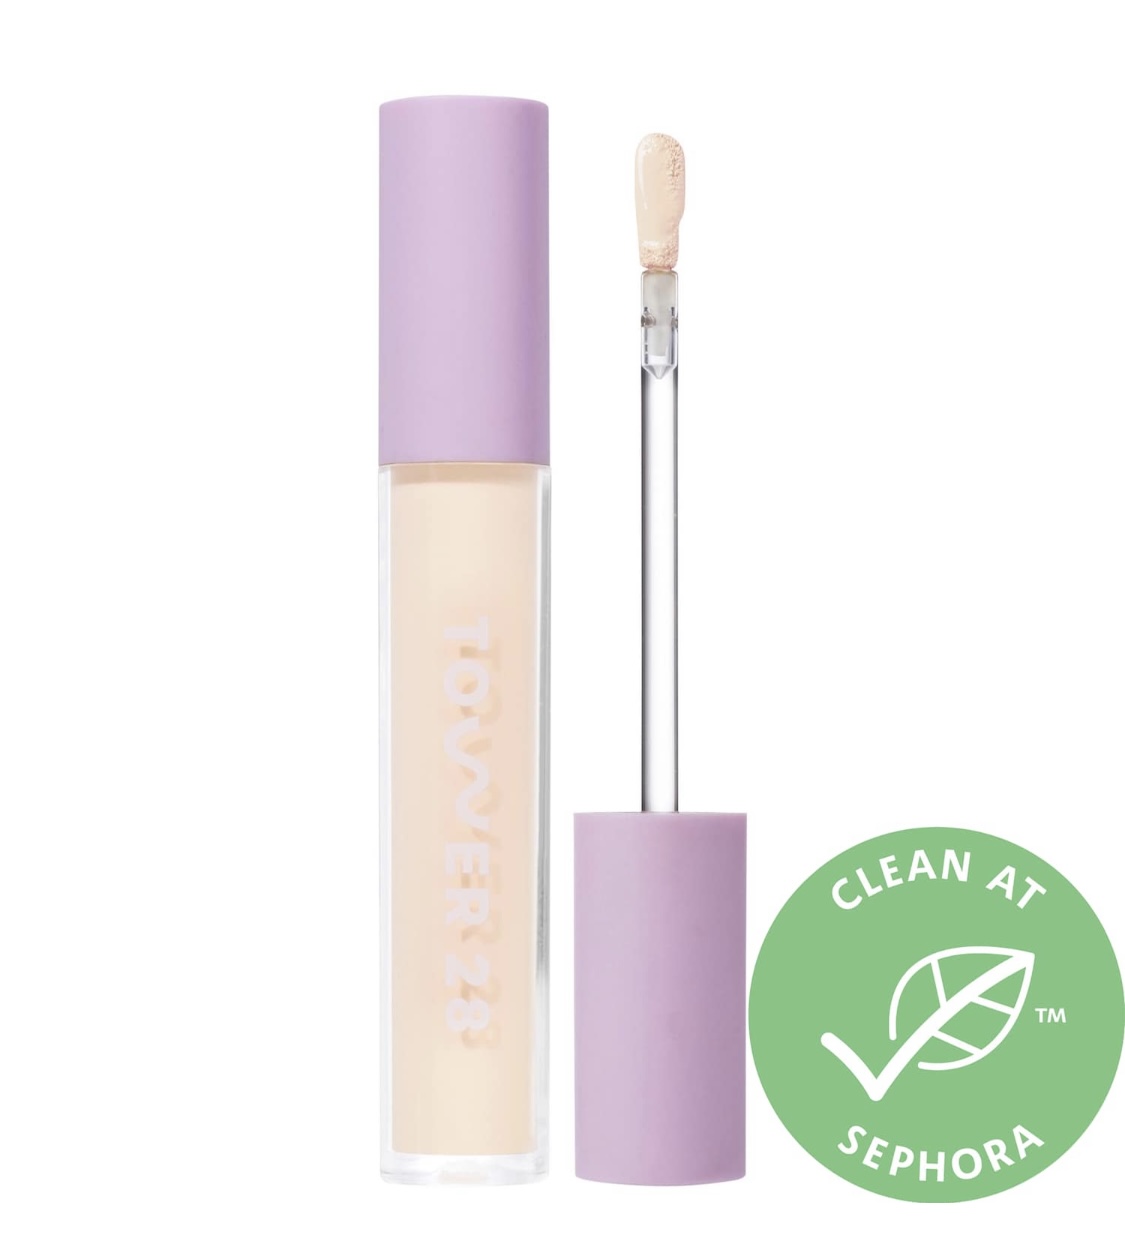 Tower 28 Beauty Swipe All Over Hydrating Serum Concealer